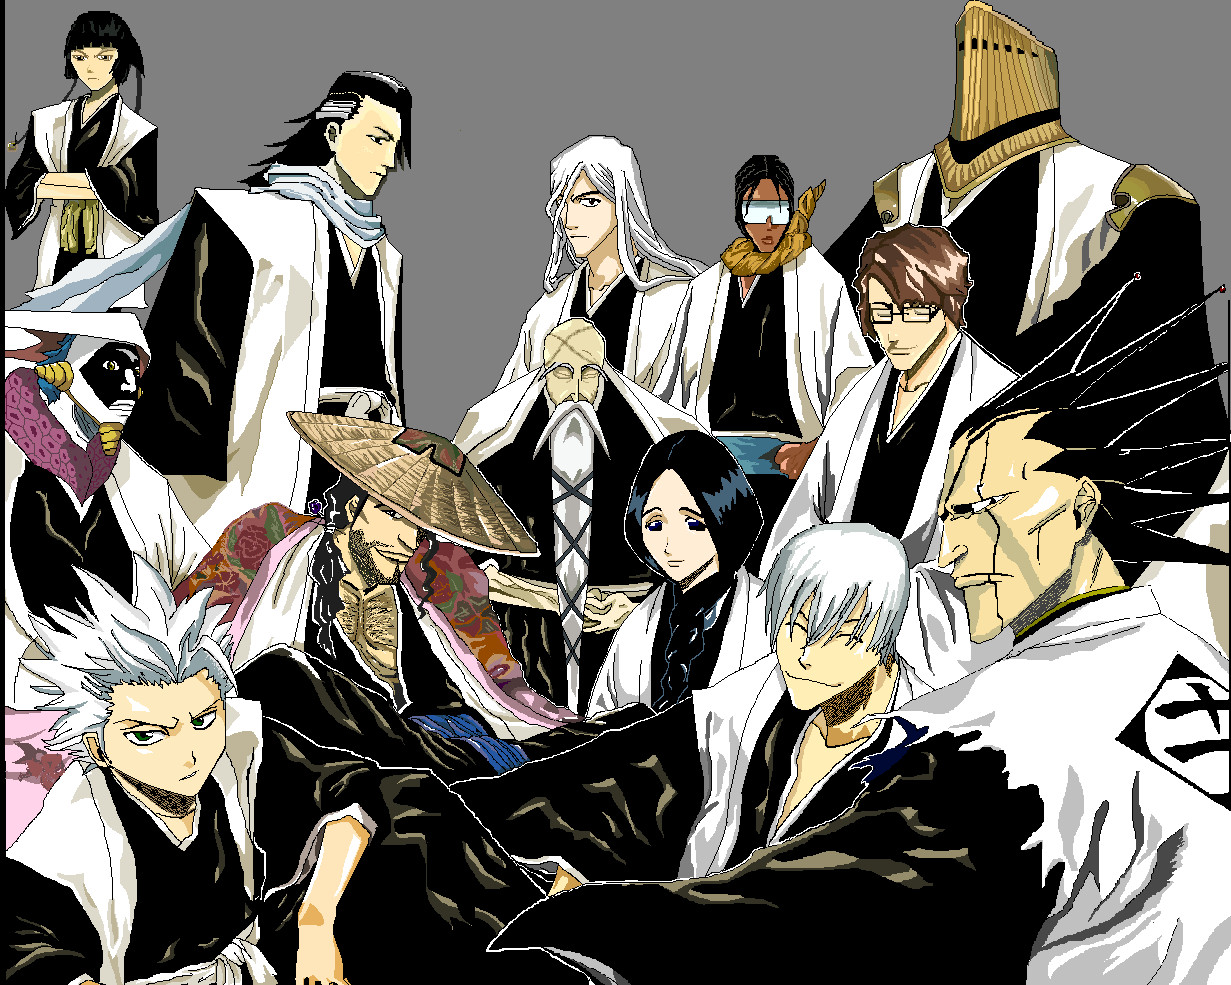 Gallery of Bleach Squad 8 Captain.